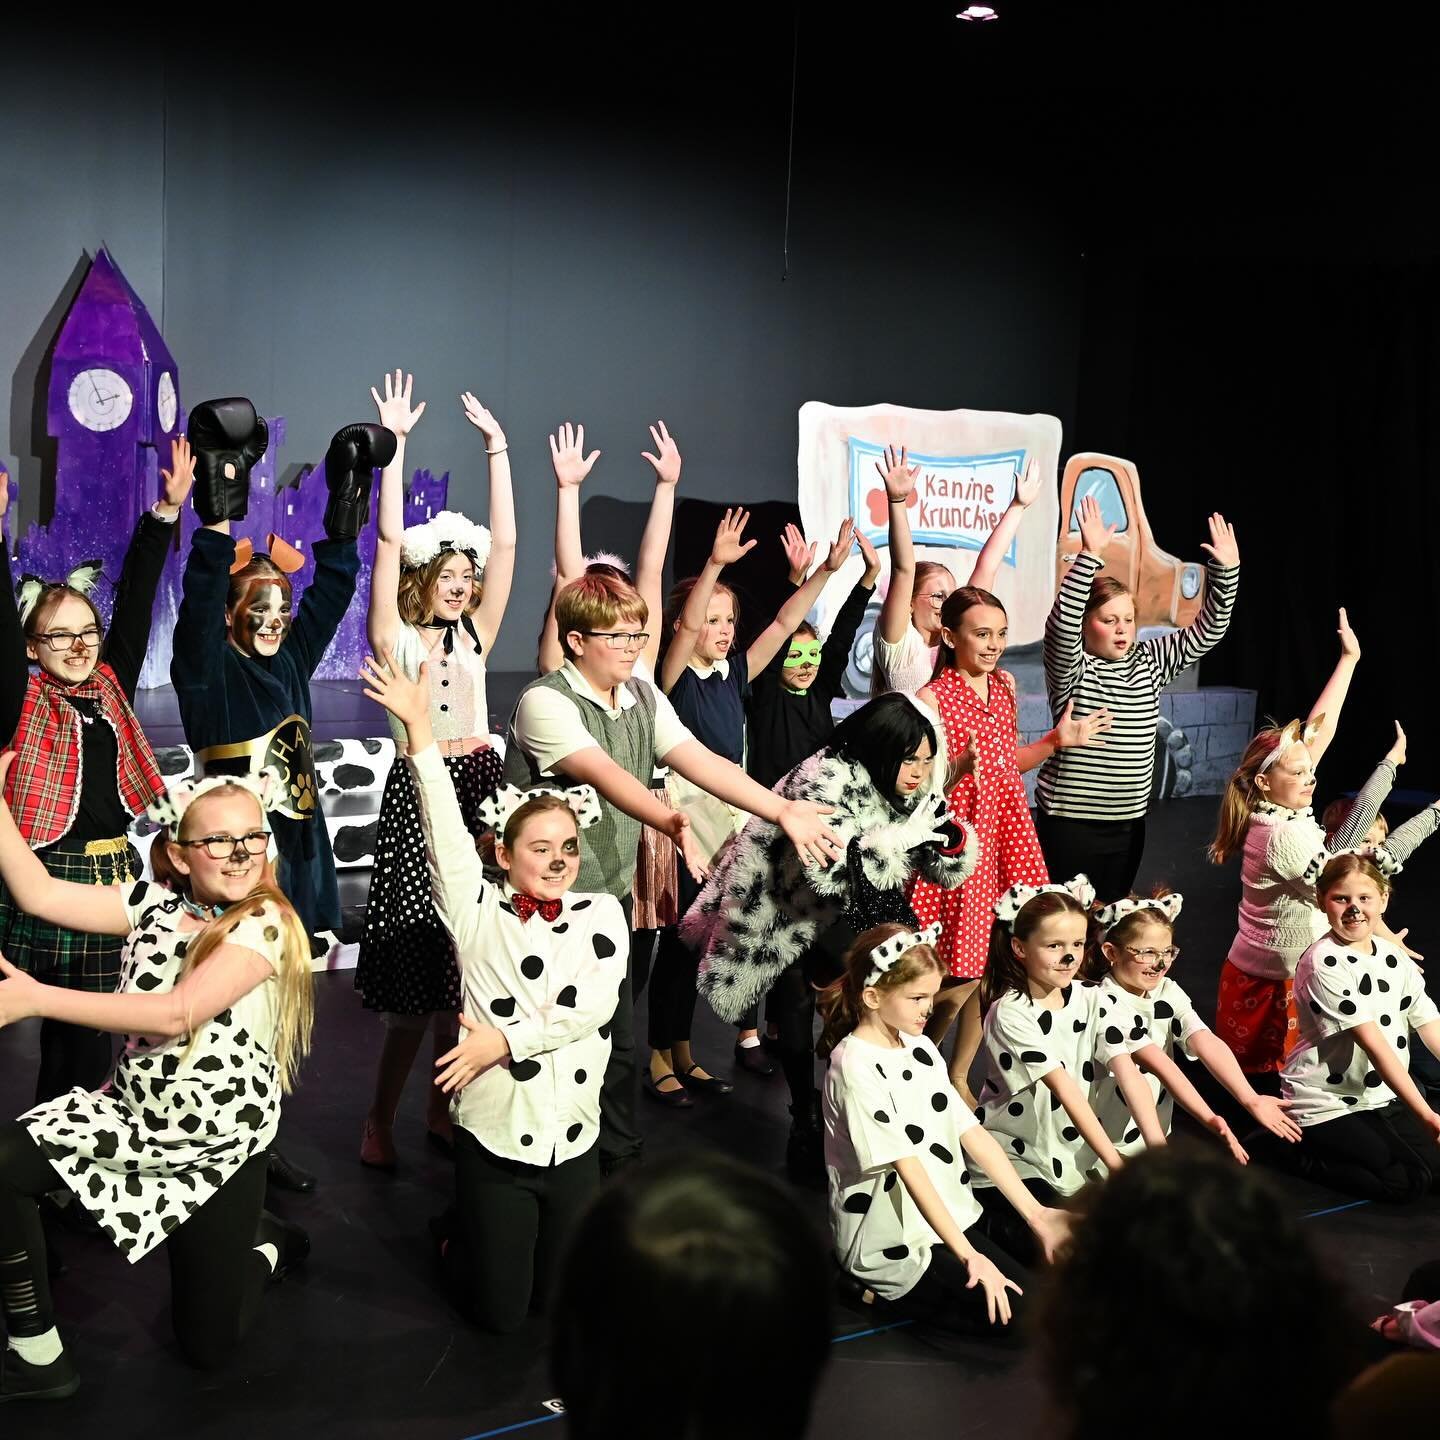 That&rsquo;s a wrap on 101 Dalmatians 🐾 We wanted to give one more thank you to everyone who helped make our first show in our black box theatre a success and we are already looking forward to the next one! 

*Full photo gallery coming soon on Faceb